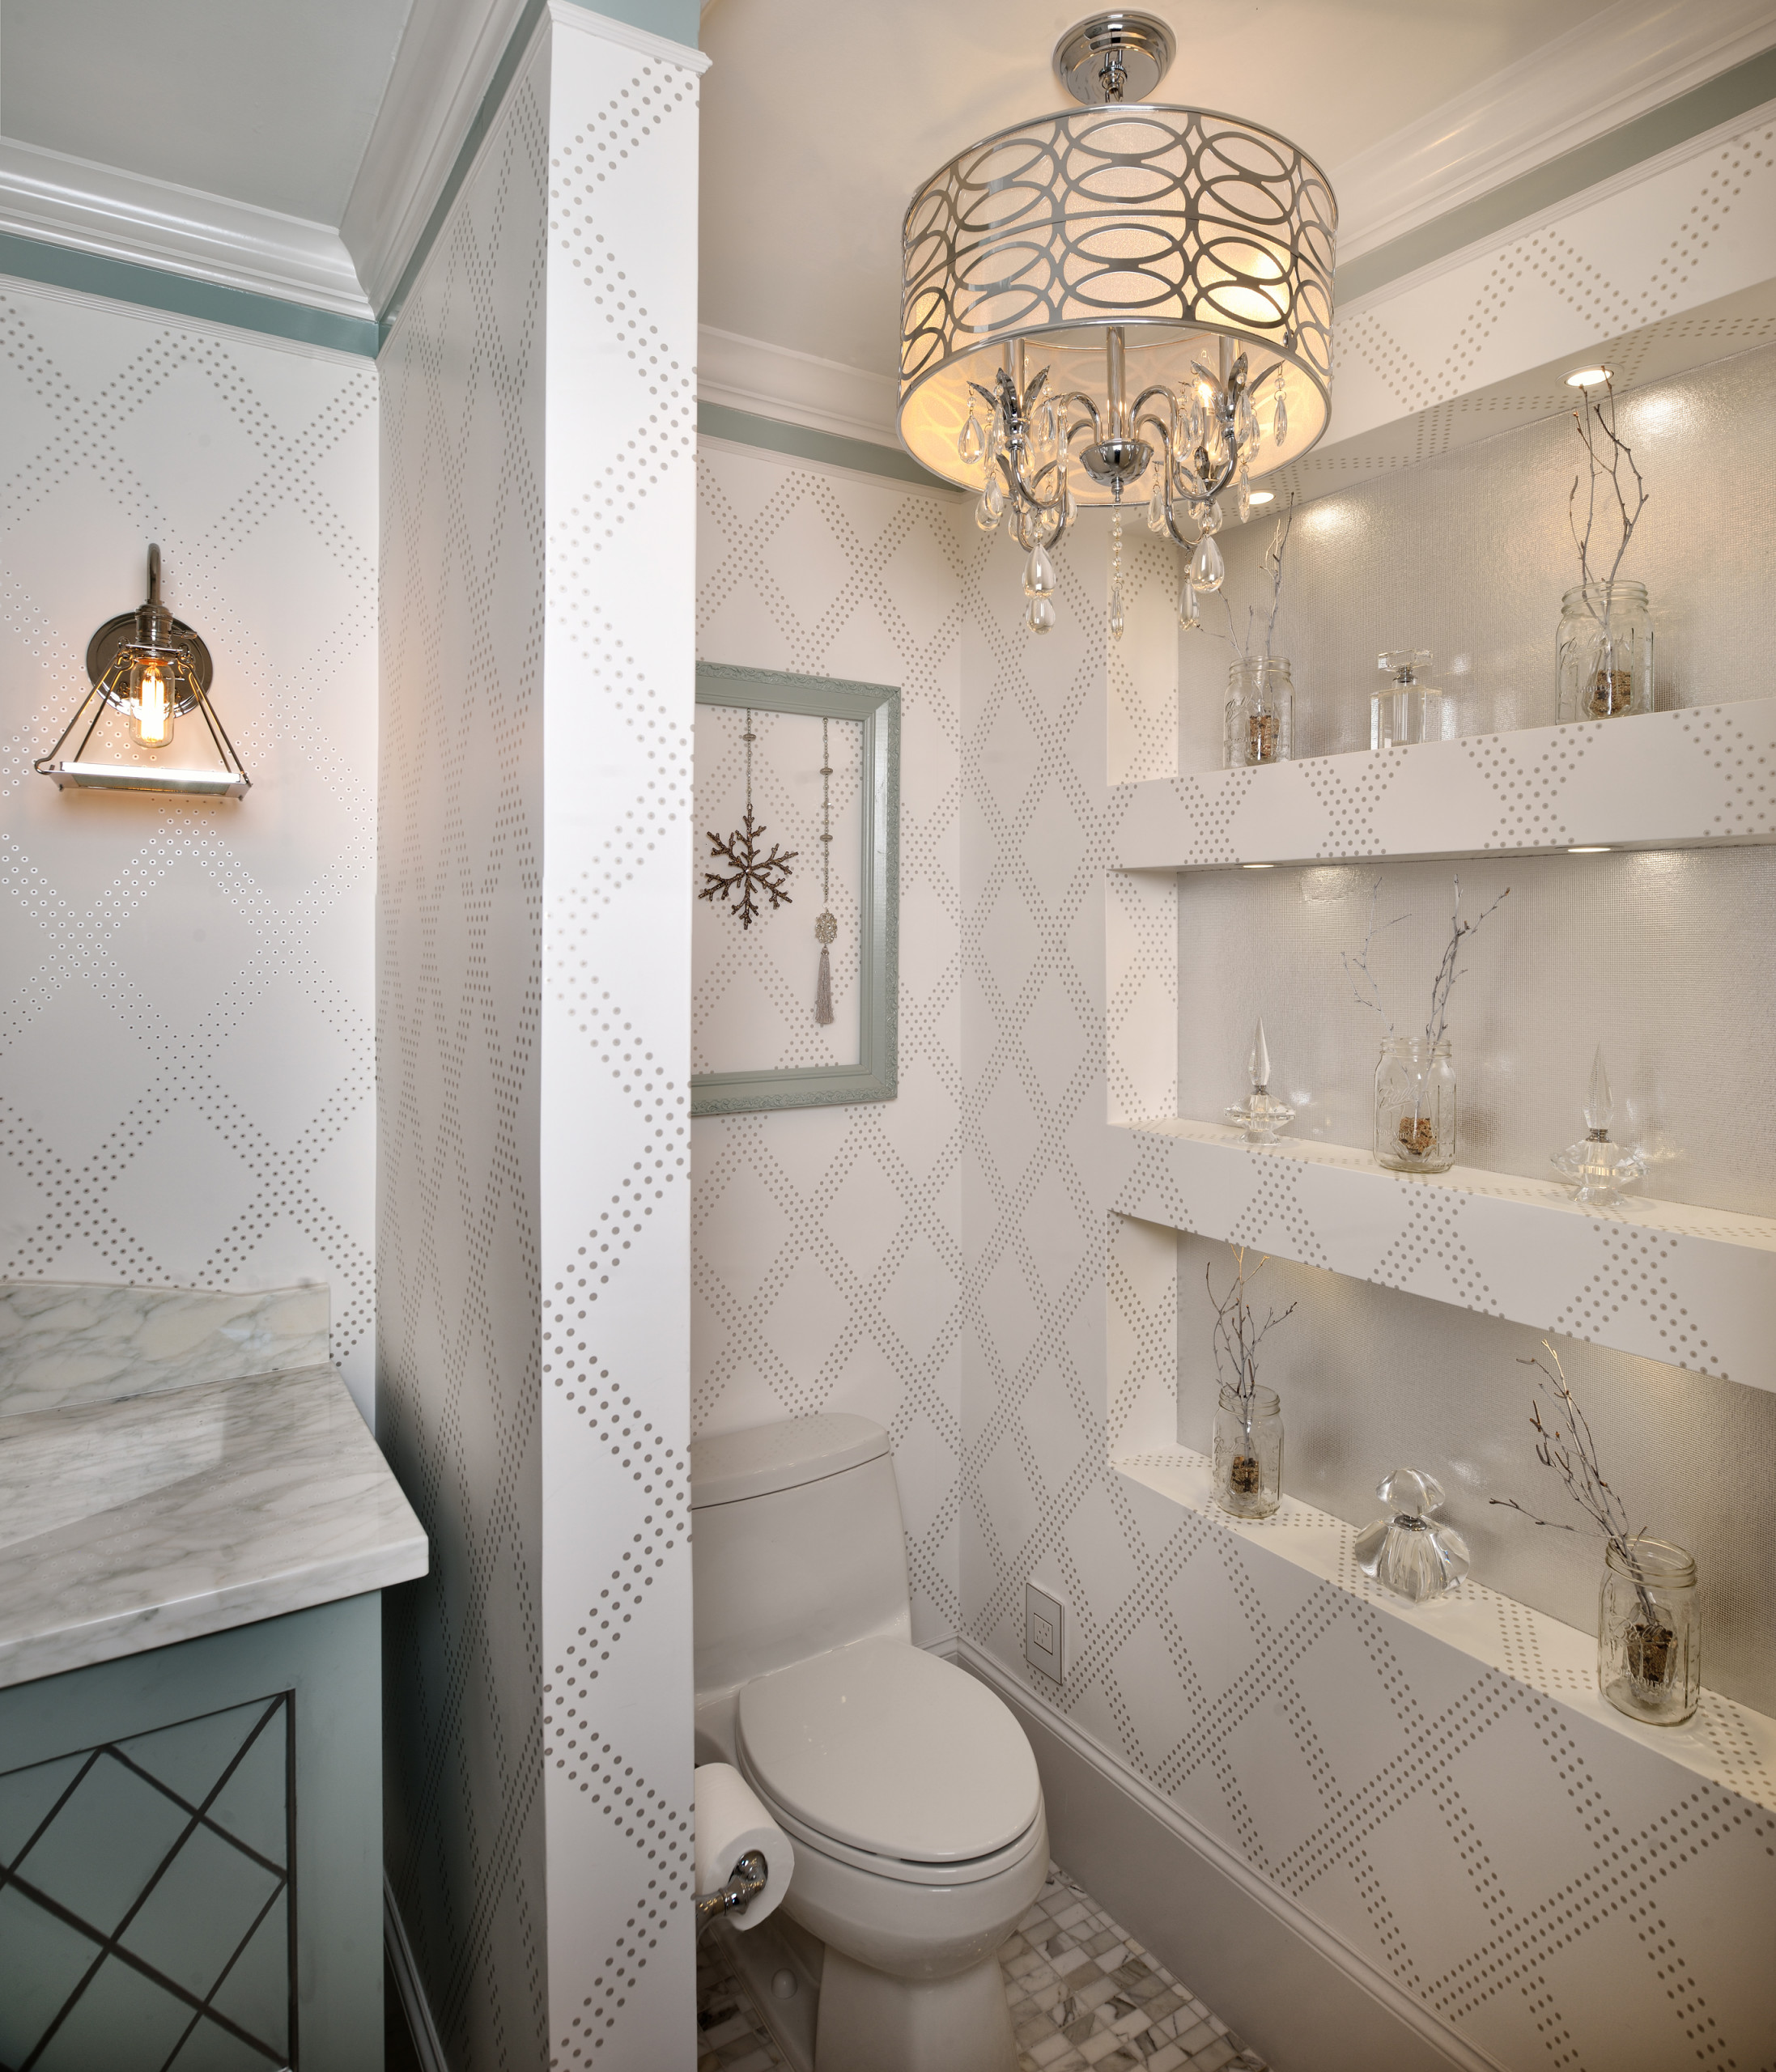 Lighted Niches With Silver Wallcovering Transitional Bathroom Houston By Clr Design Services Inc Houzz